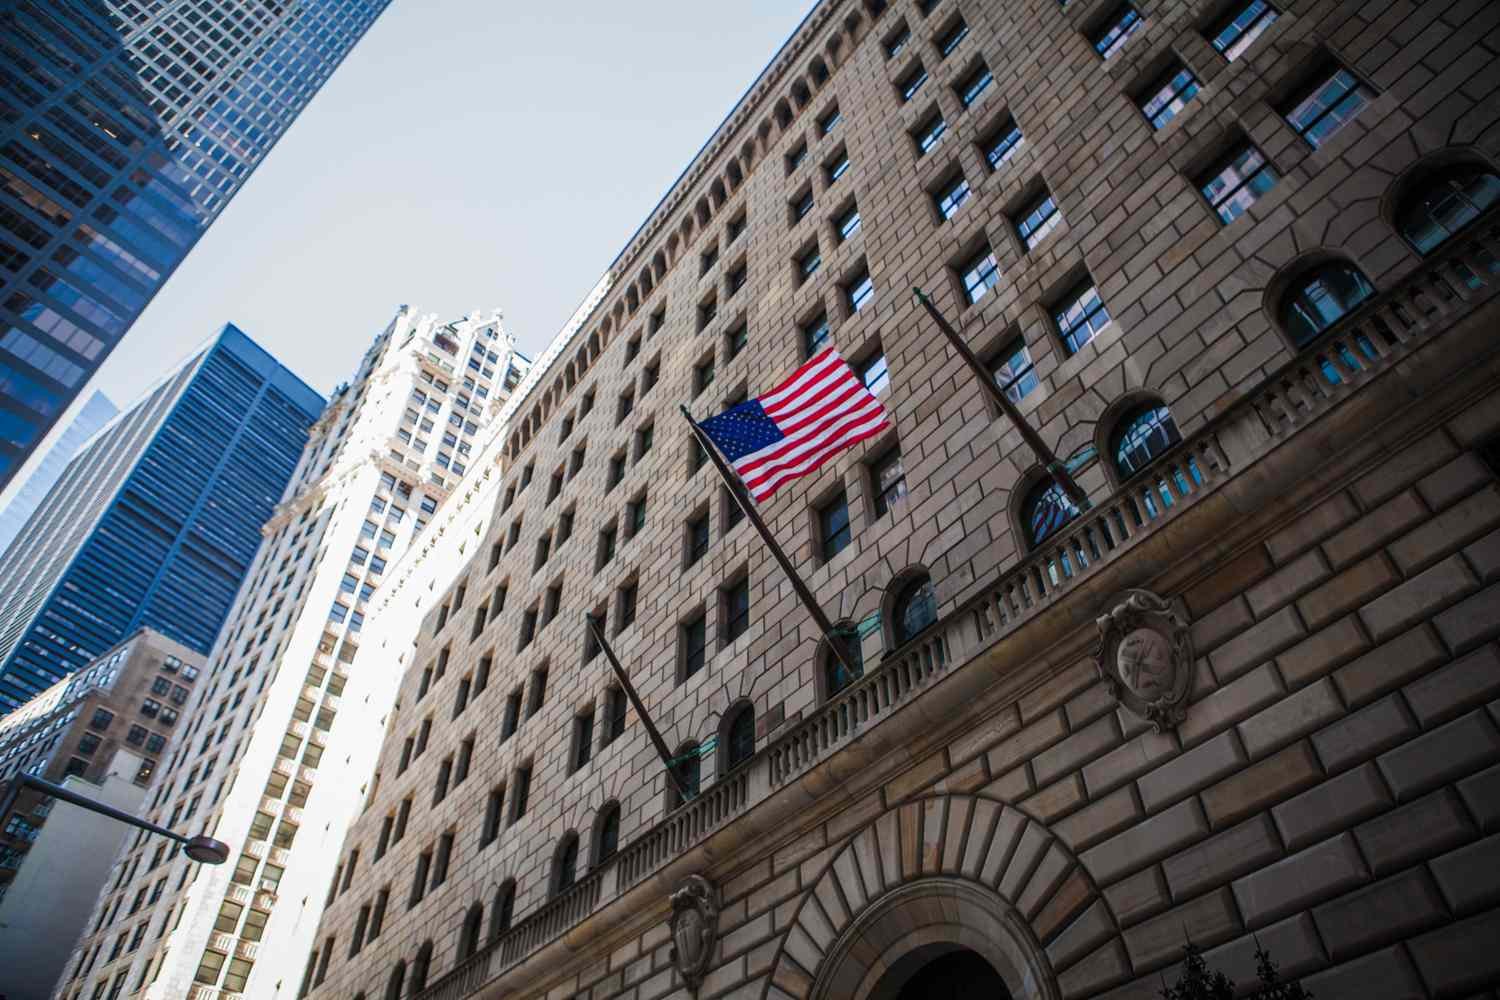 USA: New York Fed says supply chain pressures normalized in February